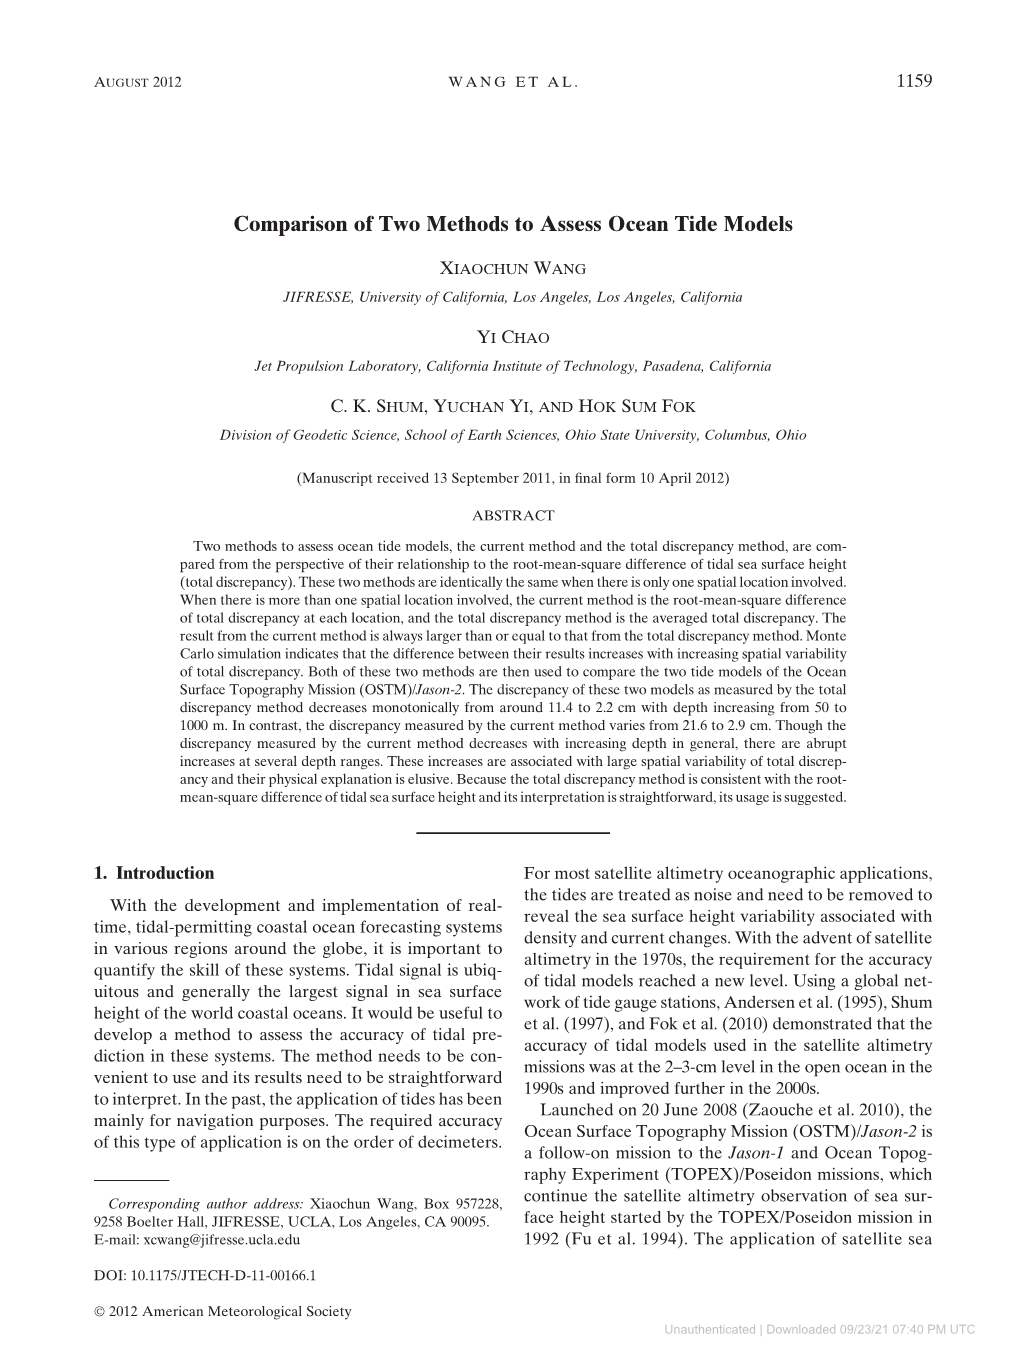 Comparison of Two Methods to Assess Ocean Tide Models